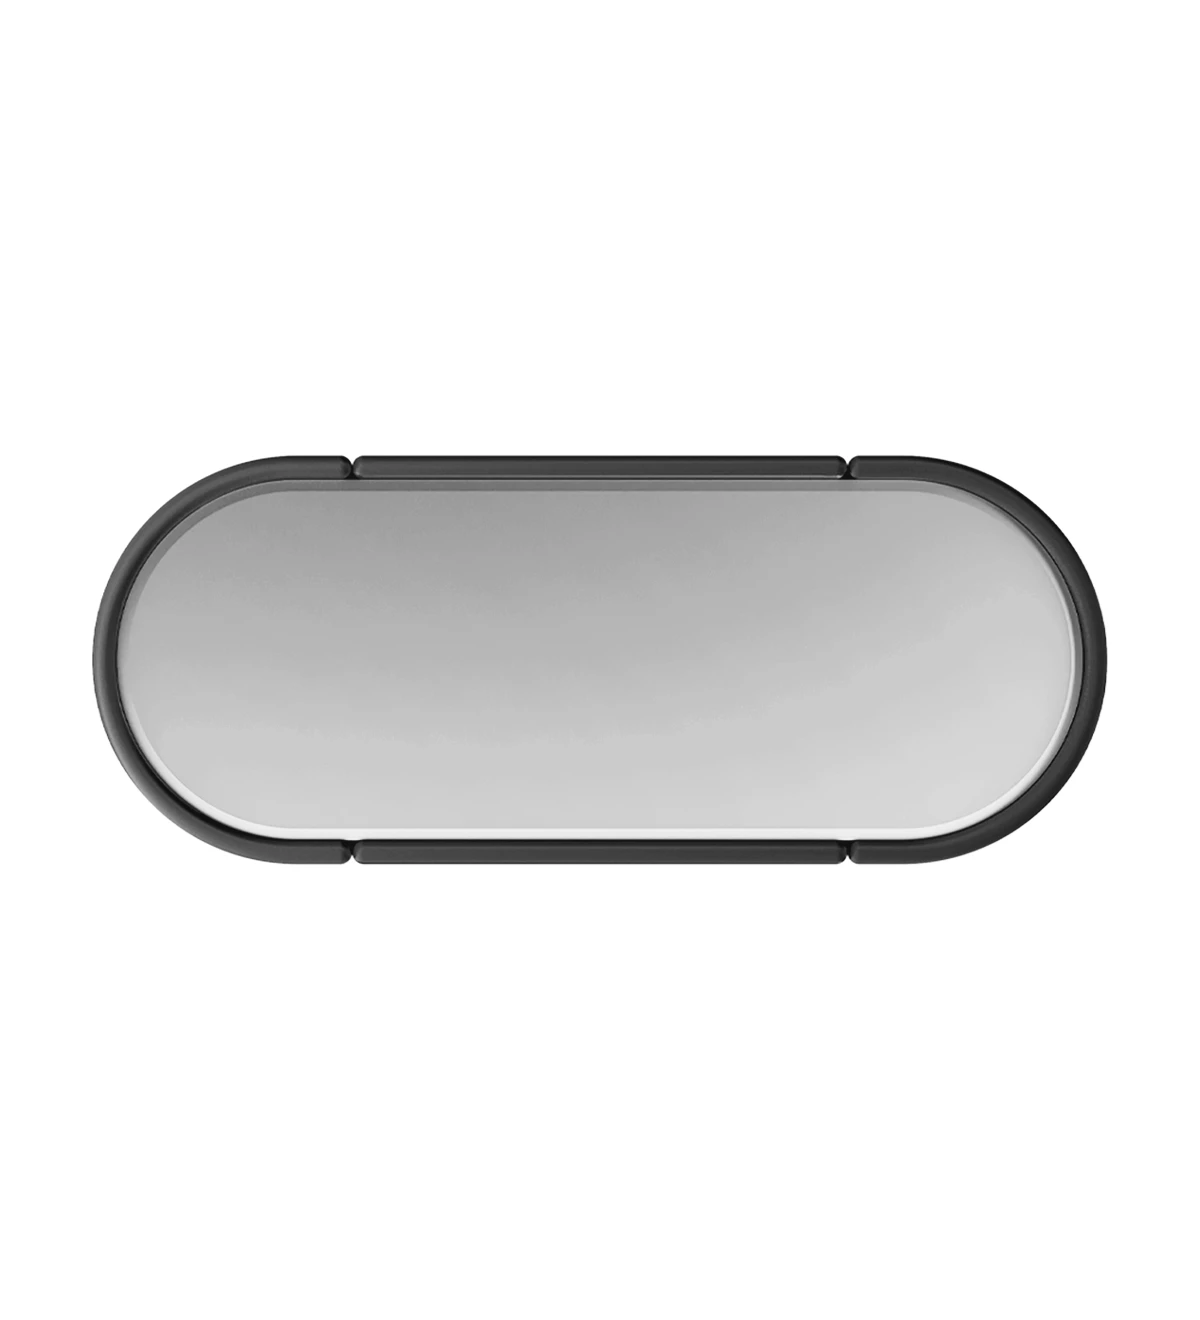 Black lacquered oval mirror